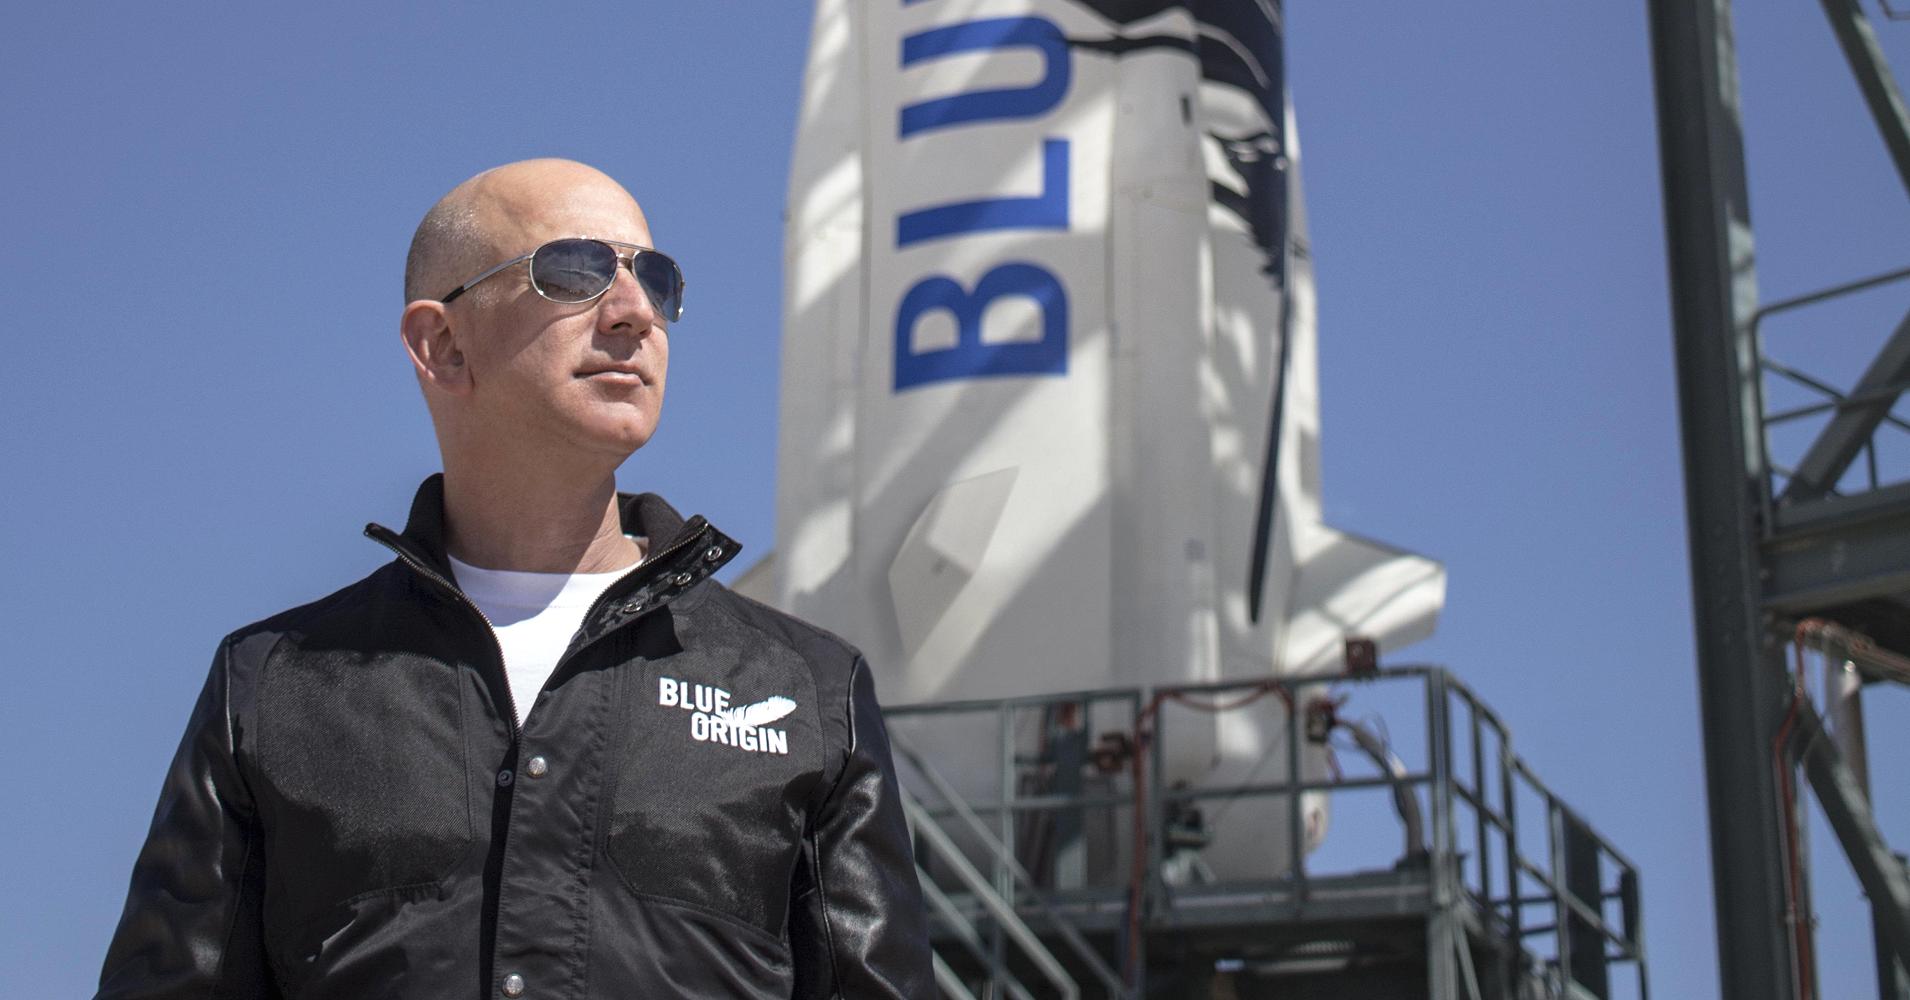 Petitions demanding Jeff Bezos not be allowed back to Earth gain almost 100,000 signatures